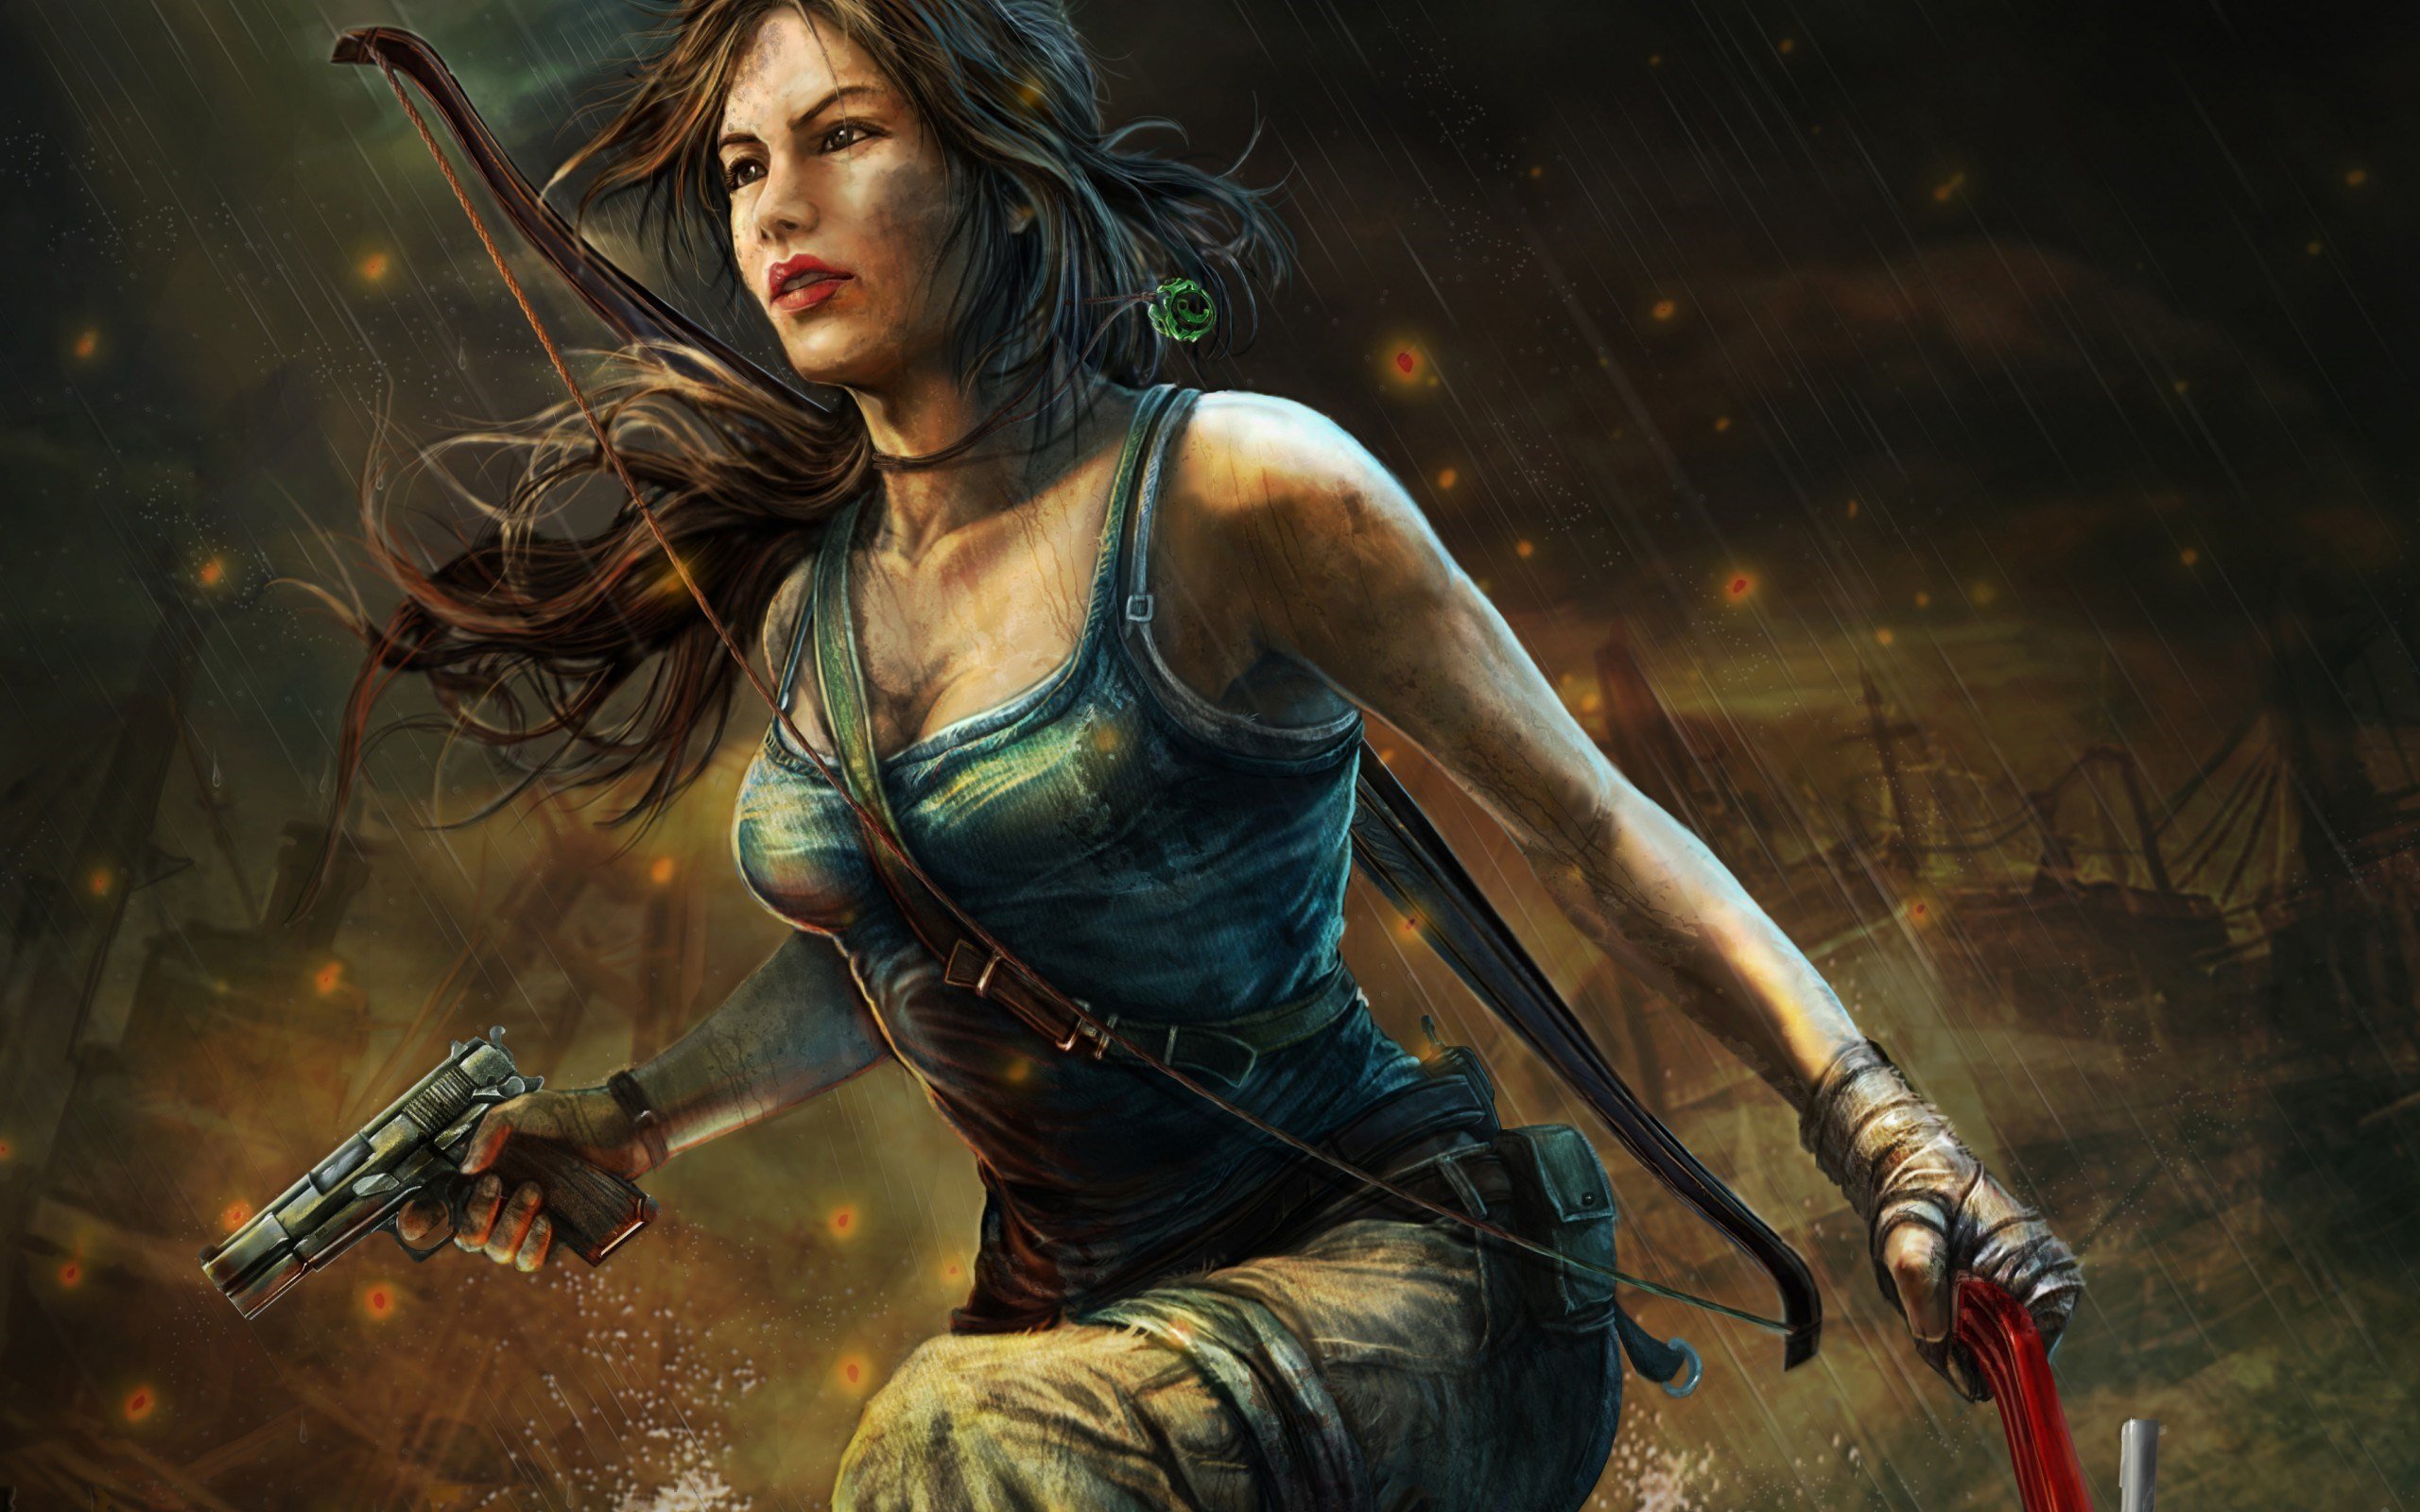 tomb raider 5 chronicles download free